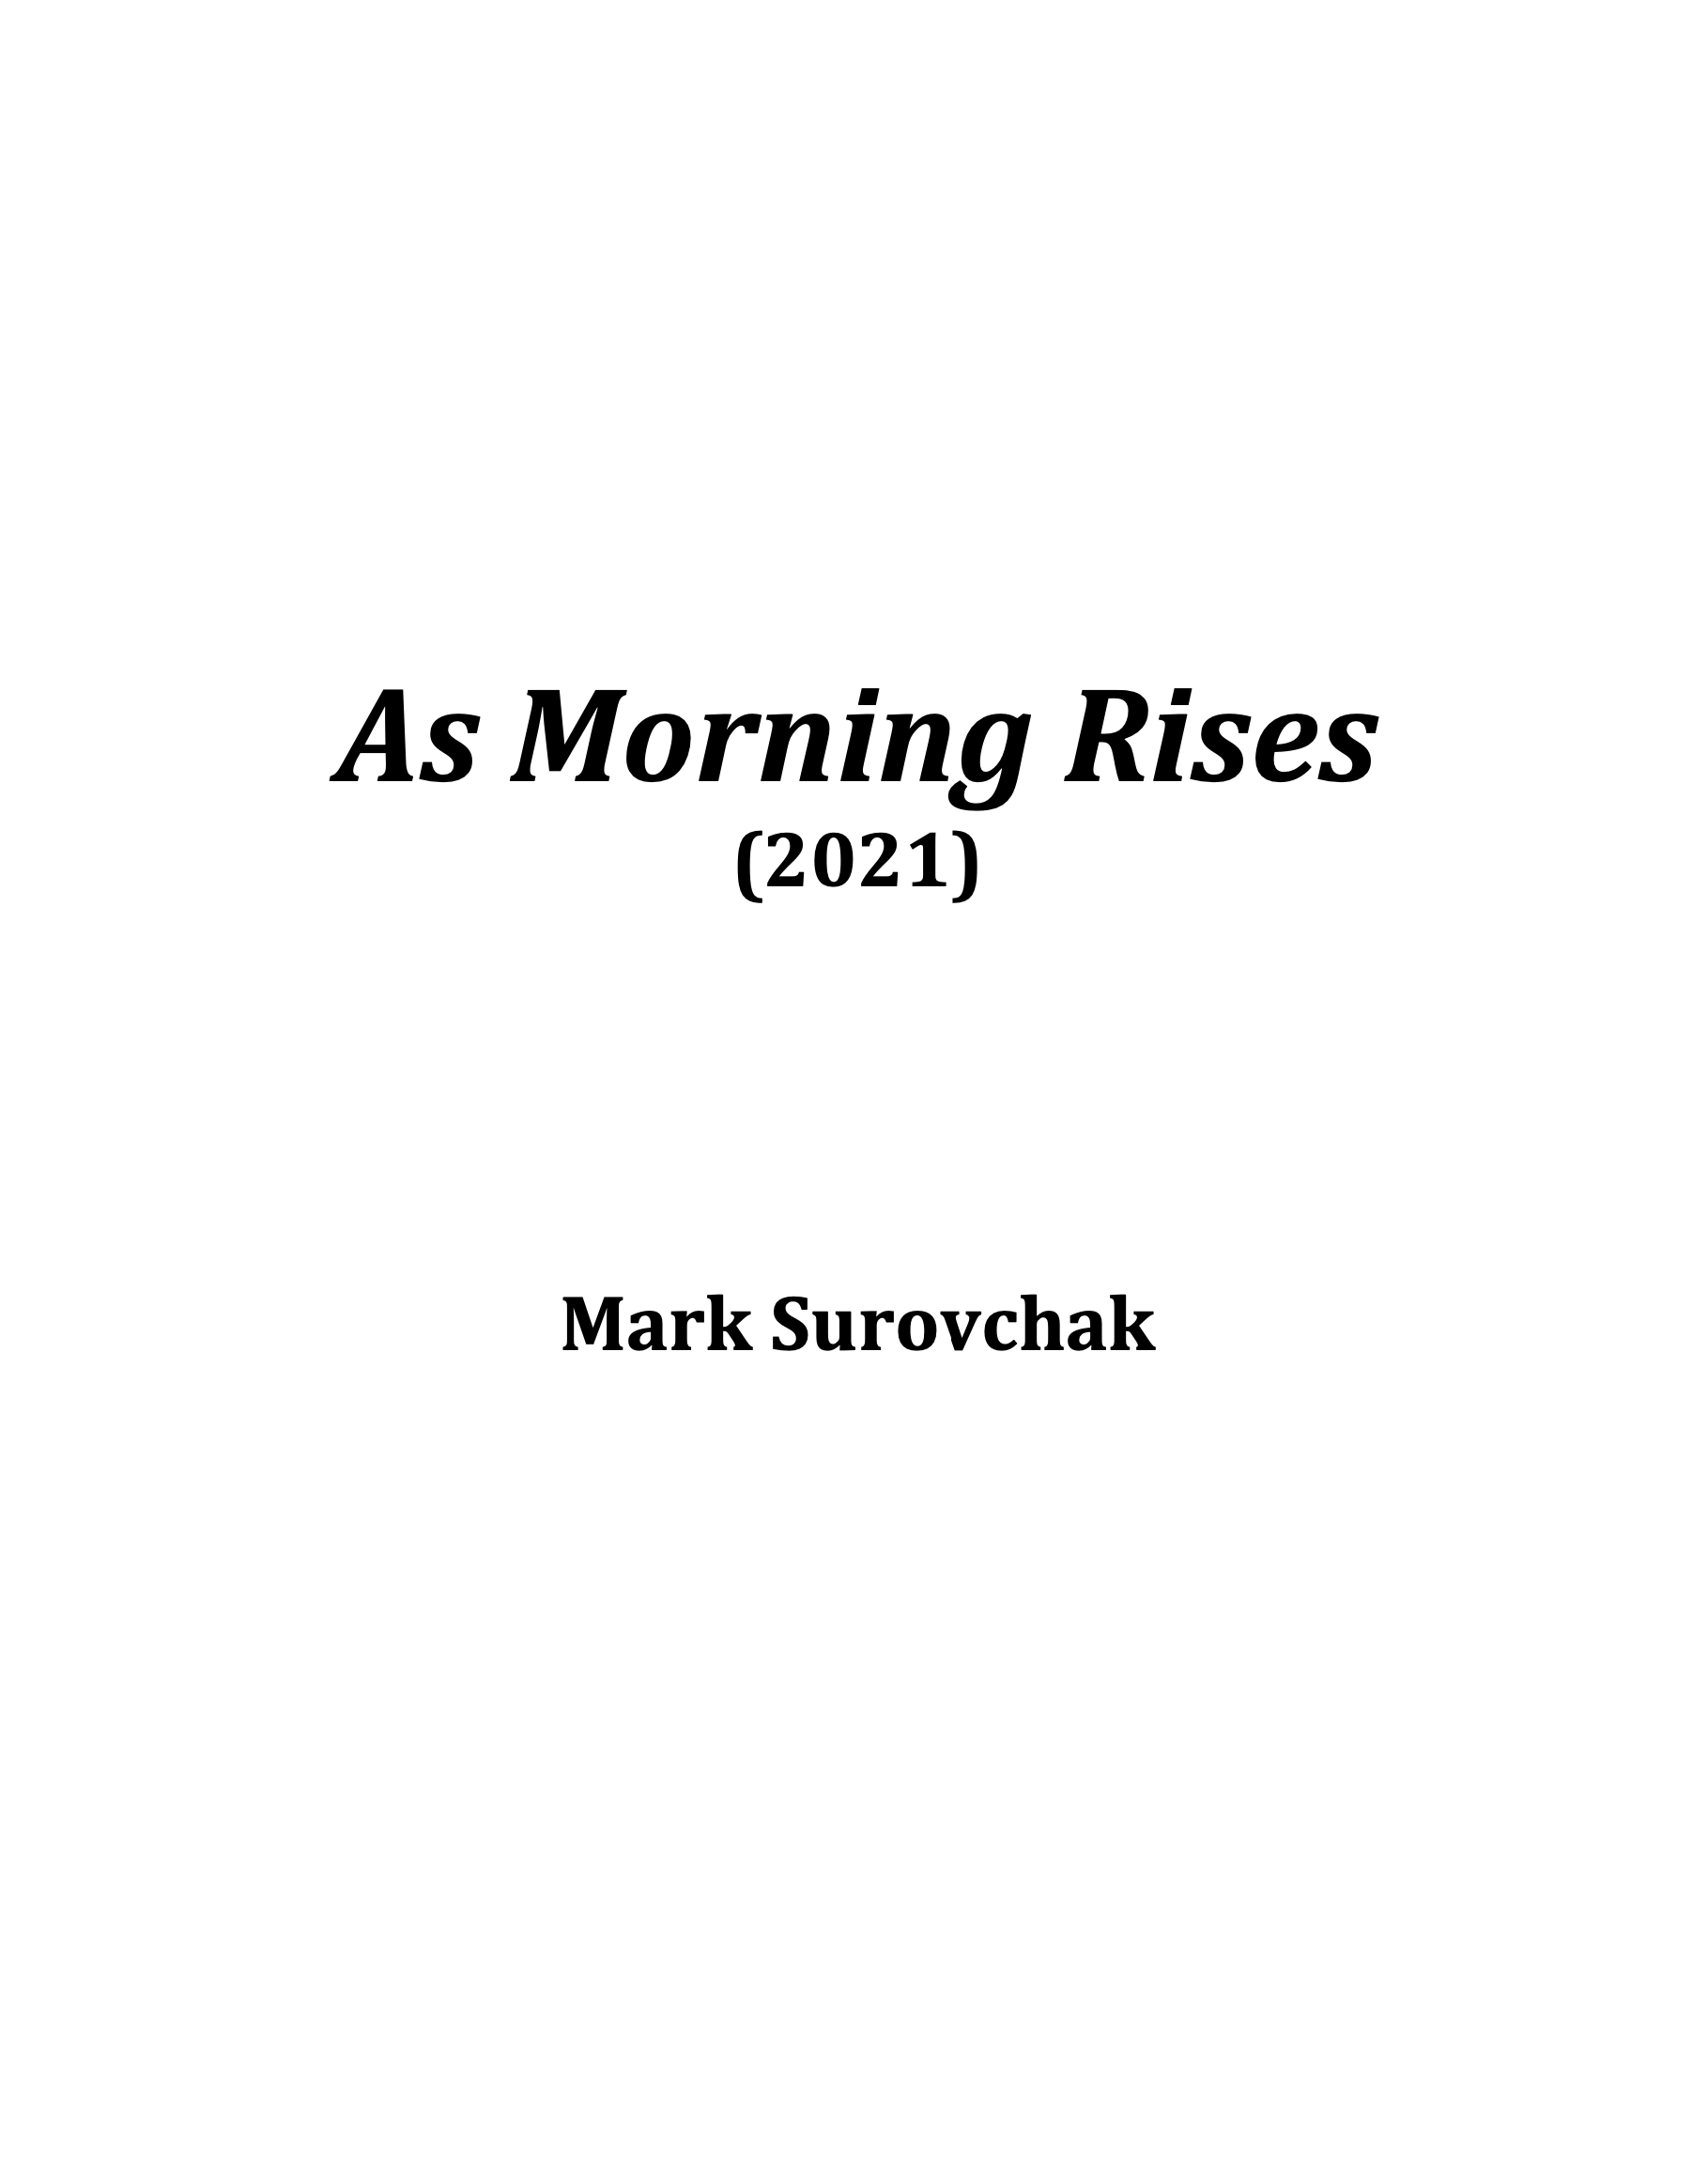 As Morning Rises by Mark Surovchak